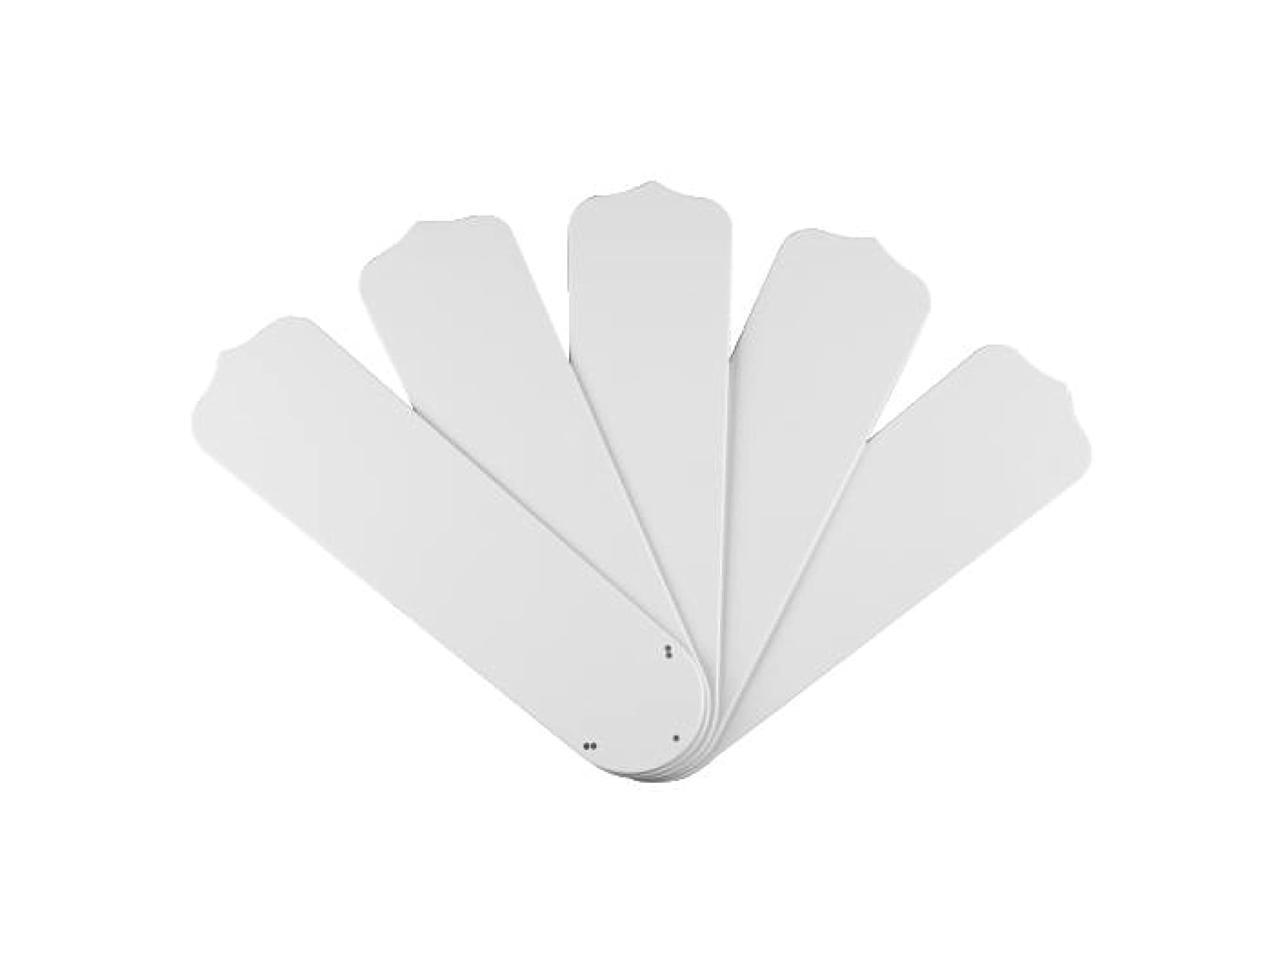 Westinghouse 7741400-52-Inch White Outdoor ABS Resin Fan Blades Pack of 5 